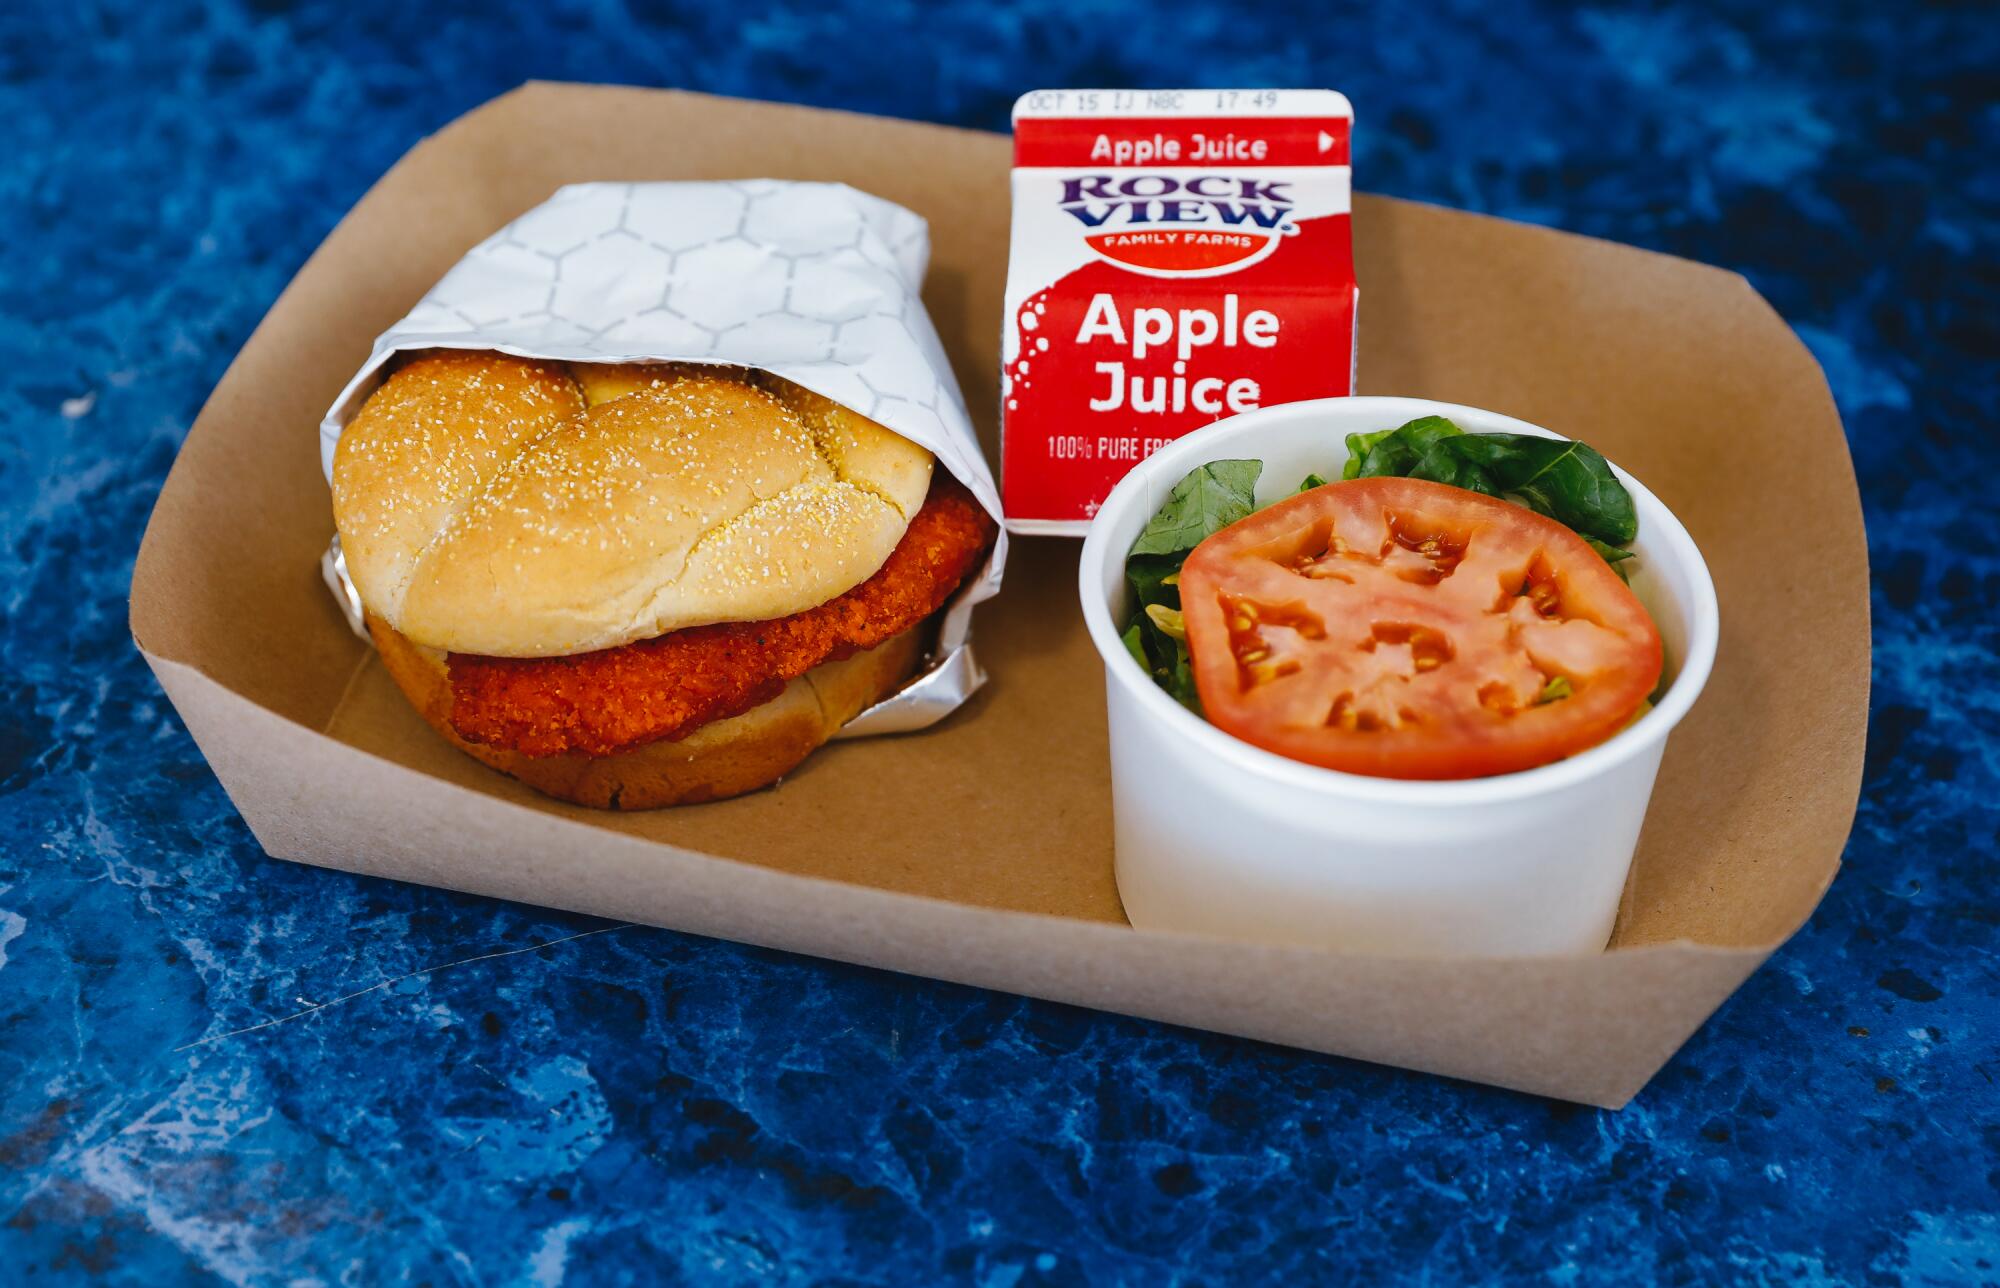 A chicken sandwich, side salad and box of juice.